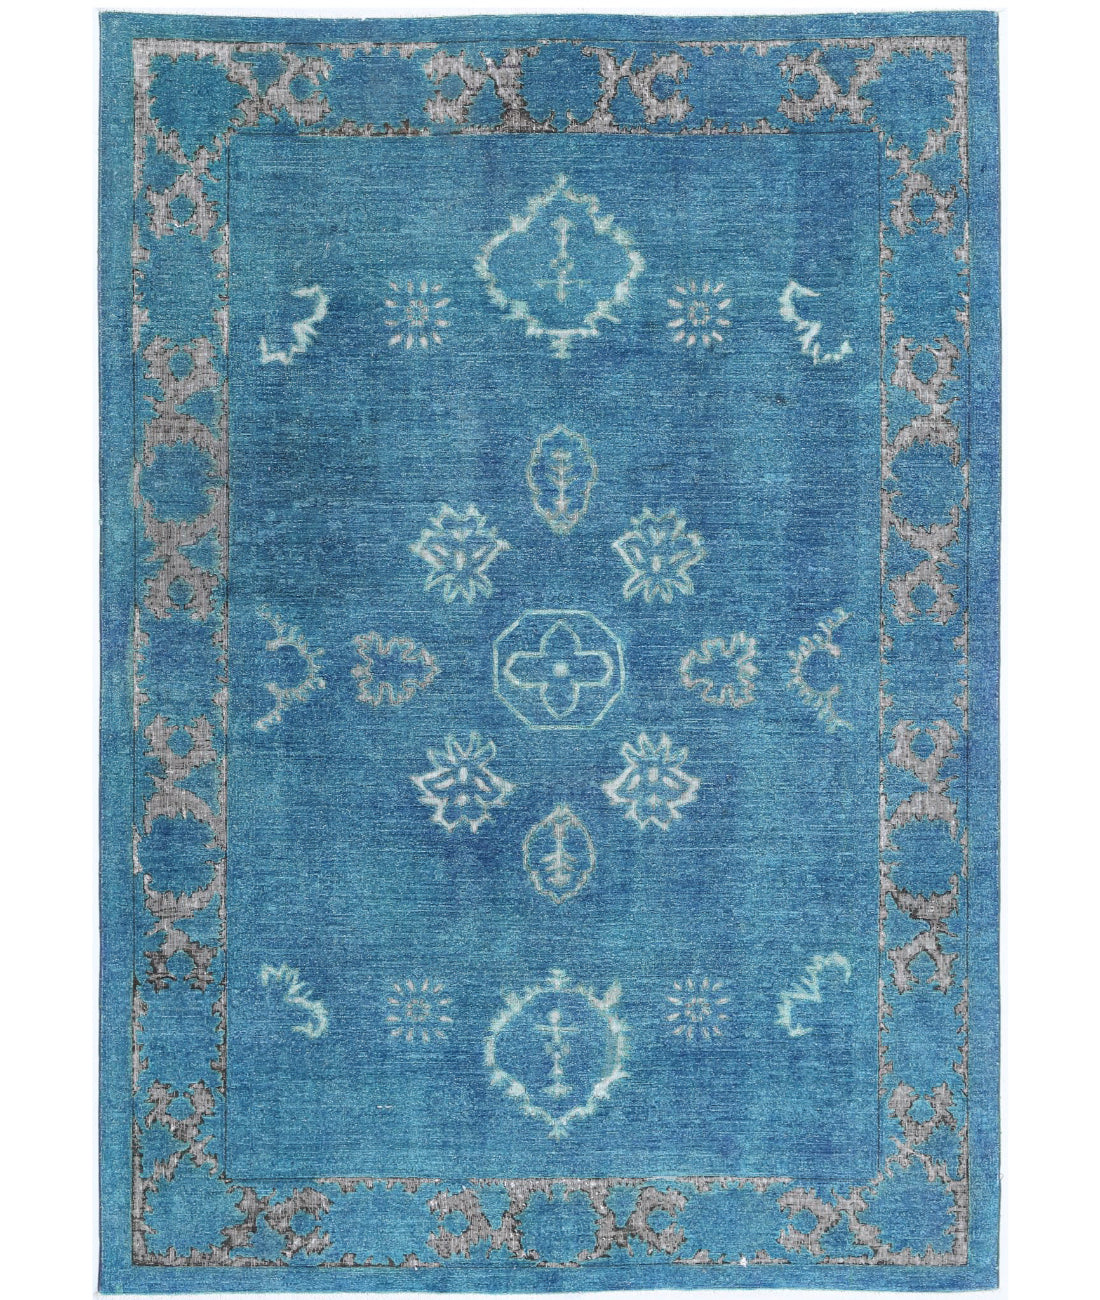 Hand Knotted Onyx Wool Rug - 5'11'' x 8'6'' 5'11'' x 8'6'' (178 X 255) / Blue / Blue